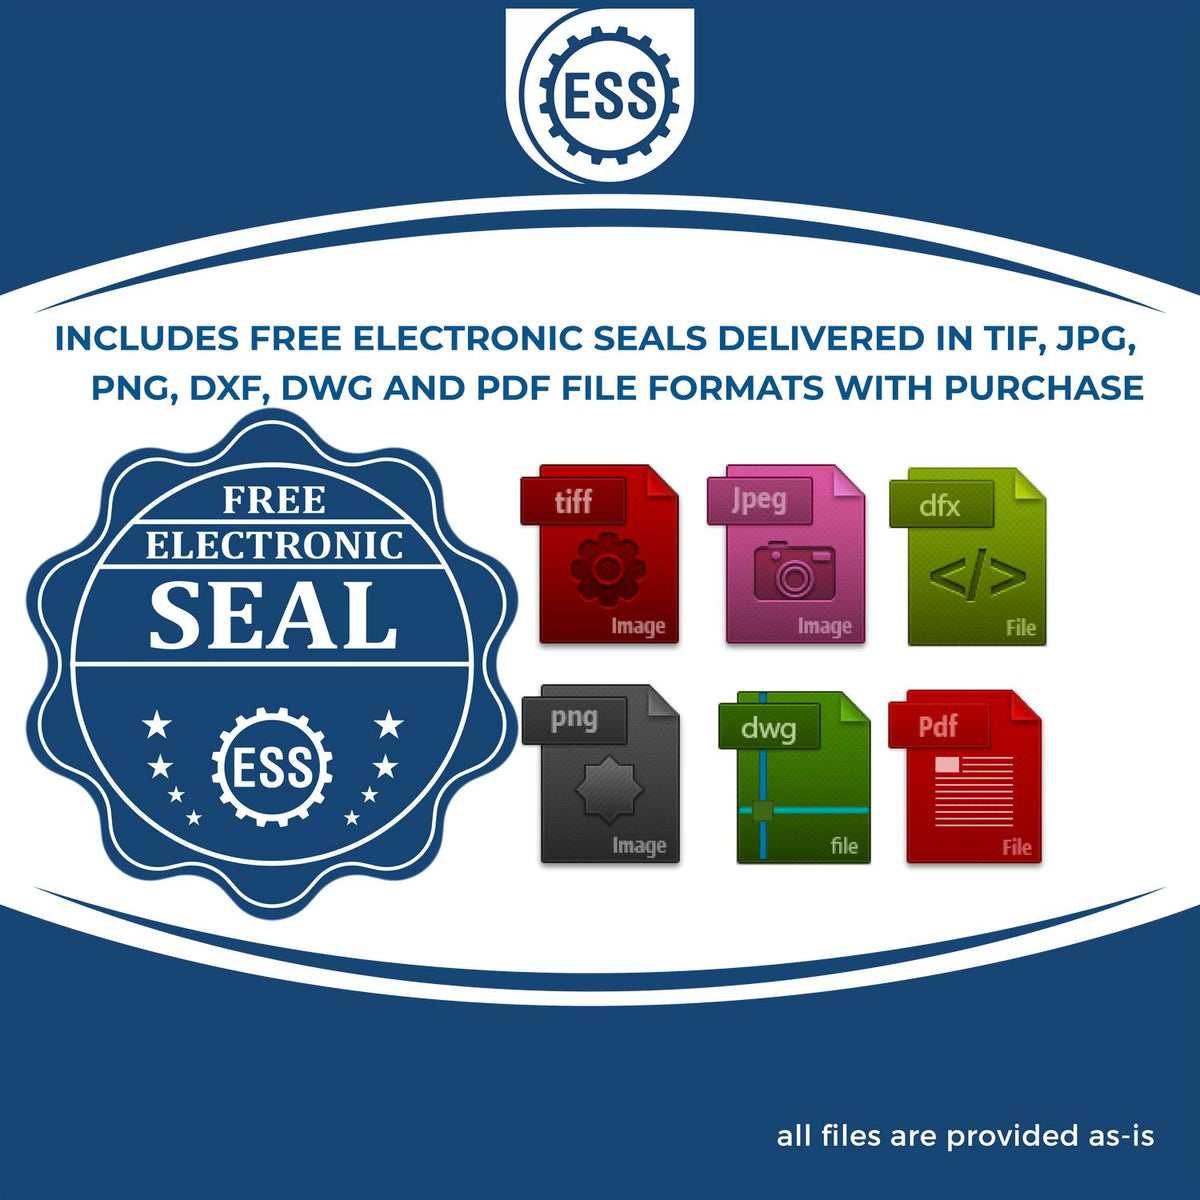 An infographic for the free electronic seal for the Slim Pre-Inked State Seal Notary Stamp for Minnesota illustrating the different file type icons such as DXF, DWG, TIF, JPG and PNG.